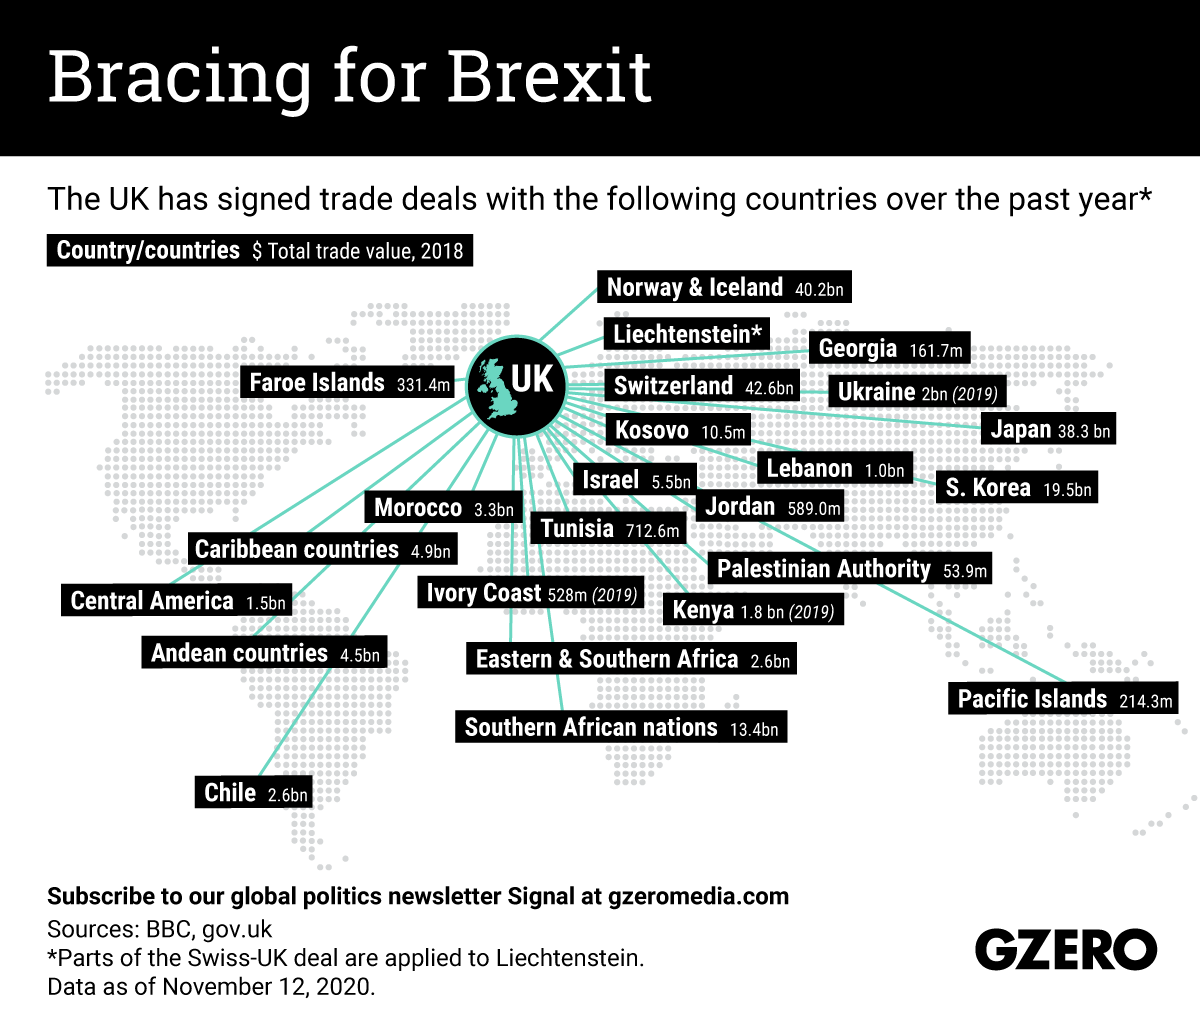 The Graphic Truth: Bracing for Brexit